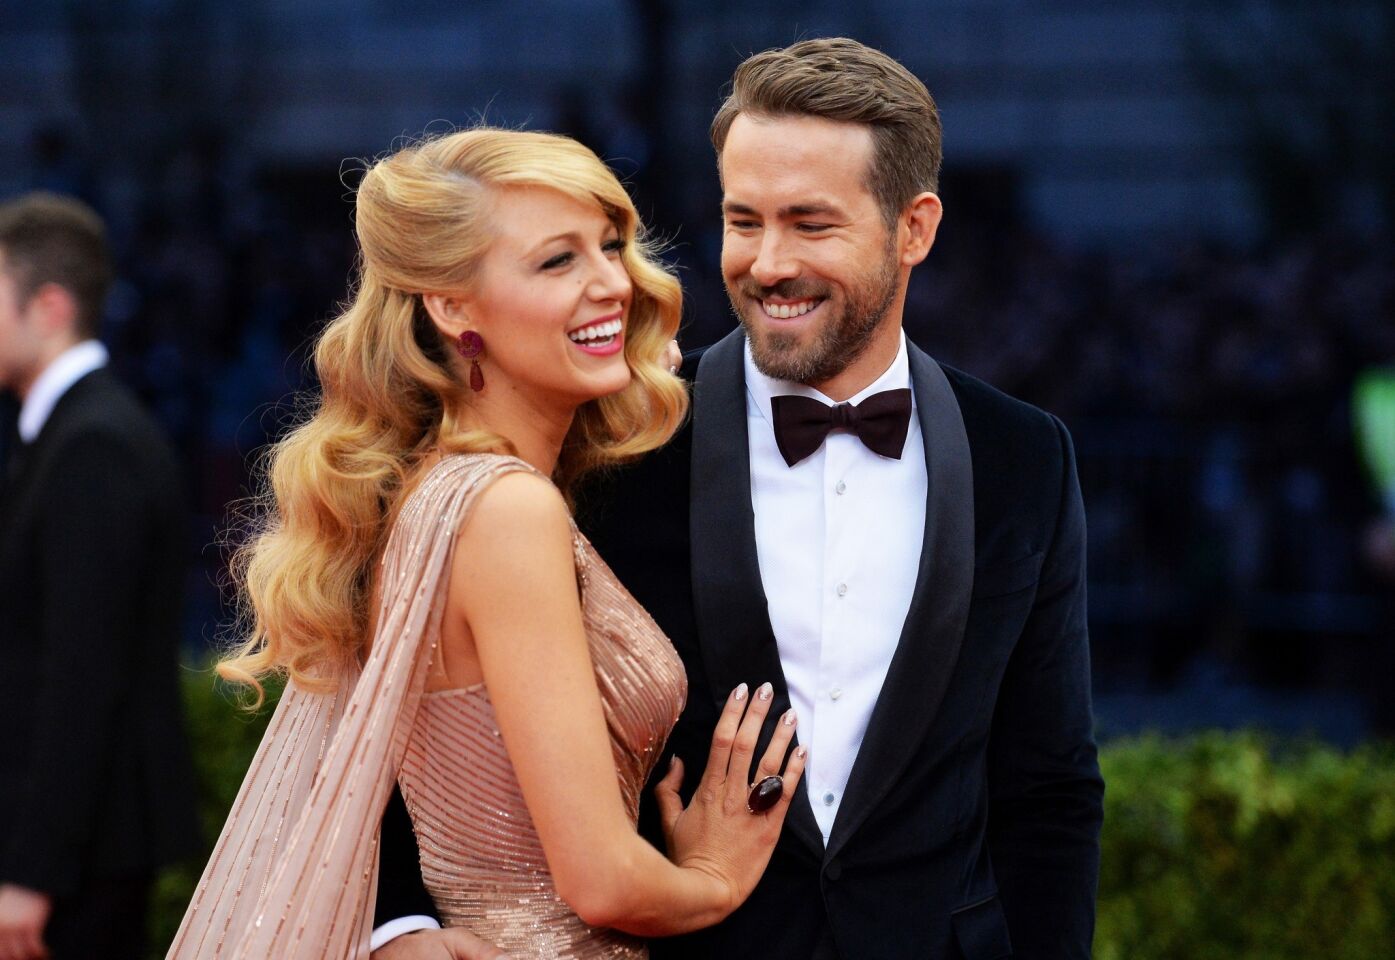 Ryan Reynolds and Blake Lively attend the "Charles James: Beyond Fashion" Costume Institute Gala at the Metropolitan Museum of Art on May 5, 2014, in New York City. Lively is wearing Gucci, the Italian design house for which she served as a spokeswoman.